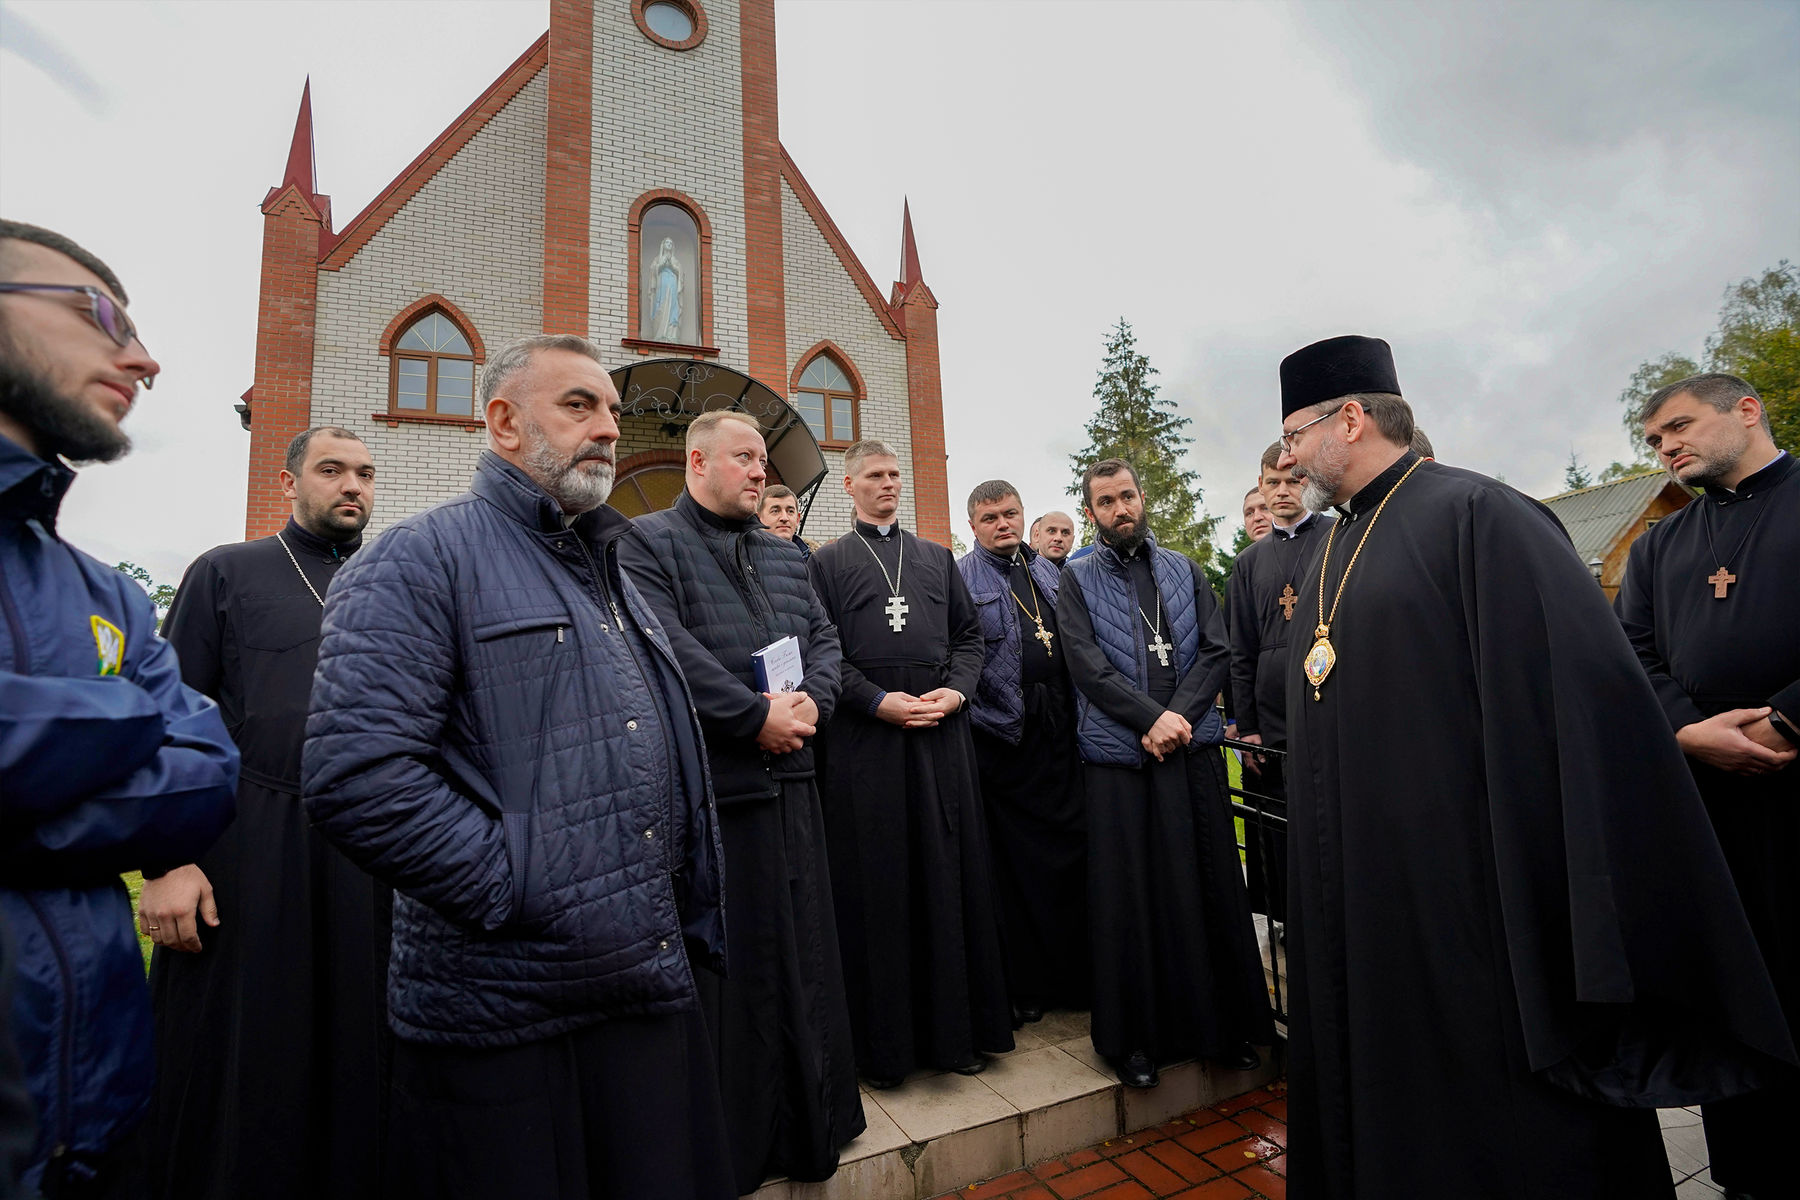 His Beatitude Sviatoslav met with the priests of the Archeparchy of Kyiv